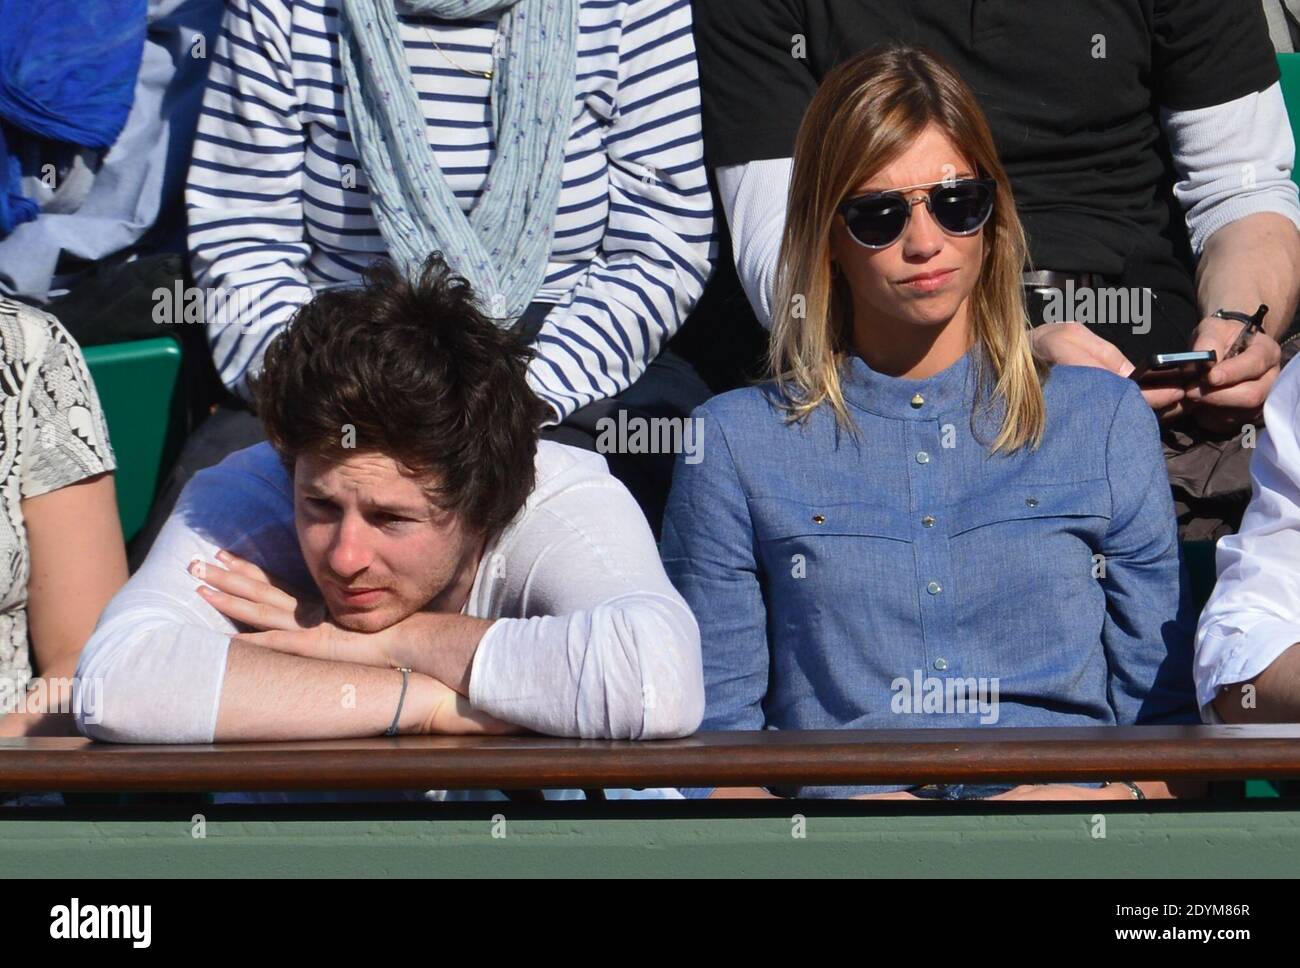 Jean Imbert and Alexandra Rosenfeld in the stands at the French Tennis Open  at Roland-Garros arena in Paris, France on Jun 04, 2013. Photo by Jeremy  Charriau/ABACAPRESS.COM Stock Photo - Alamy